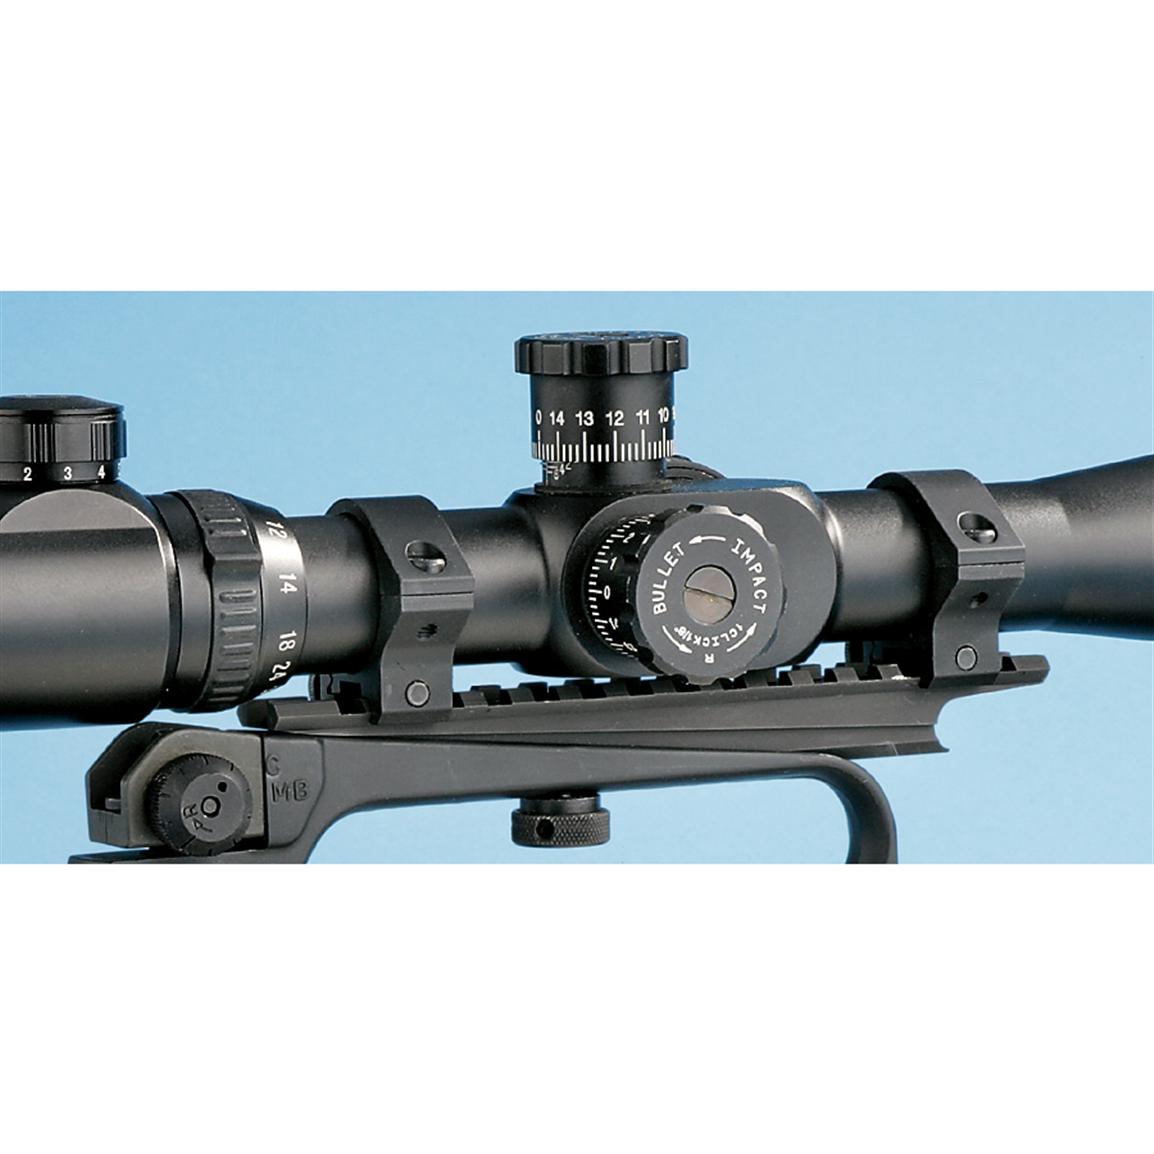 Ar 15 M16 Carry Handle Scope Mount 90141 Tactical Rifle Accessories At Sportsmans Guide